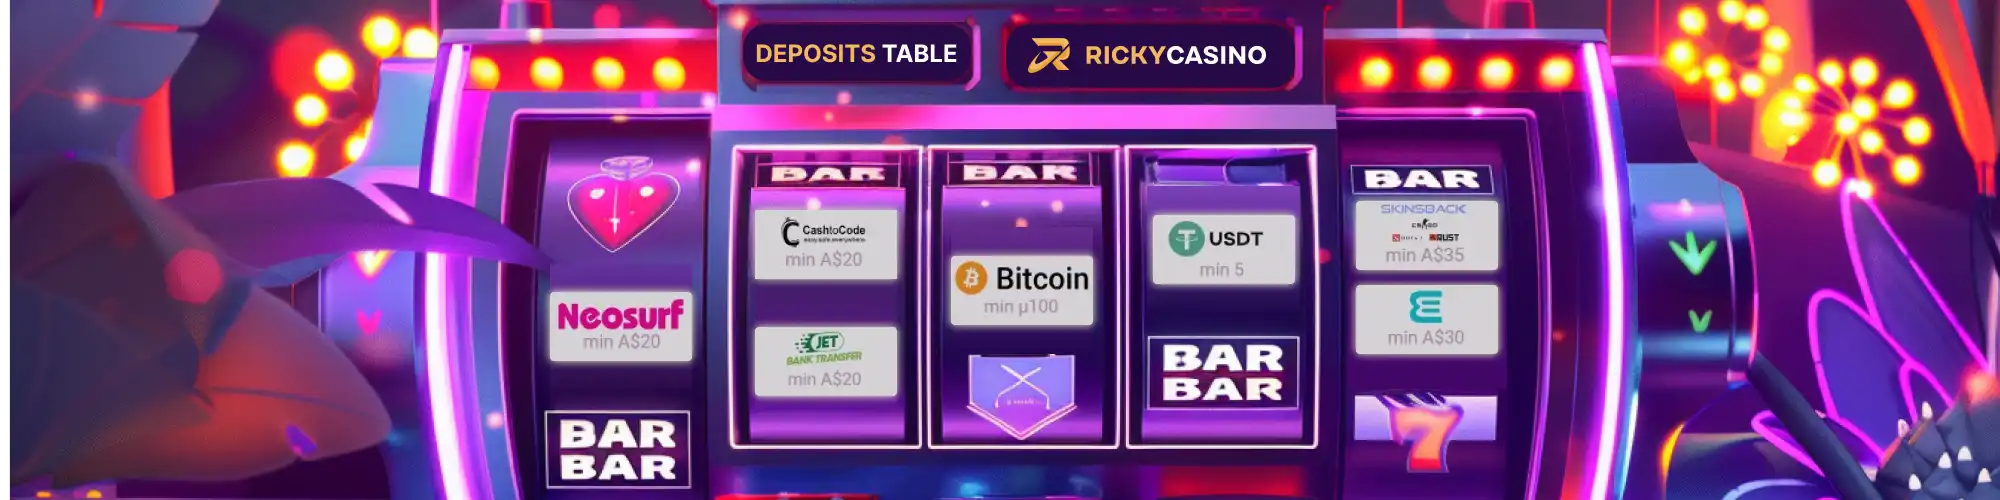 Deposits Table at Ricky Casino